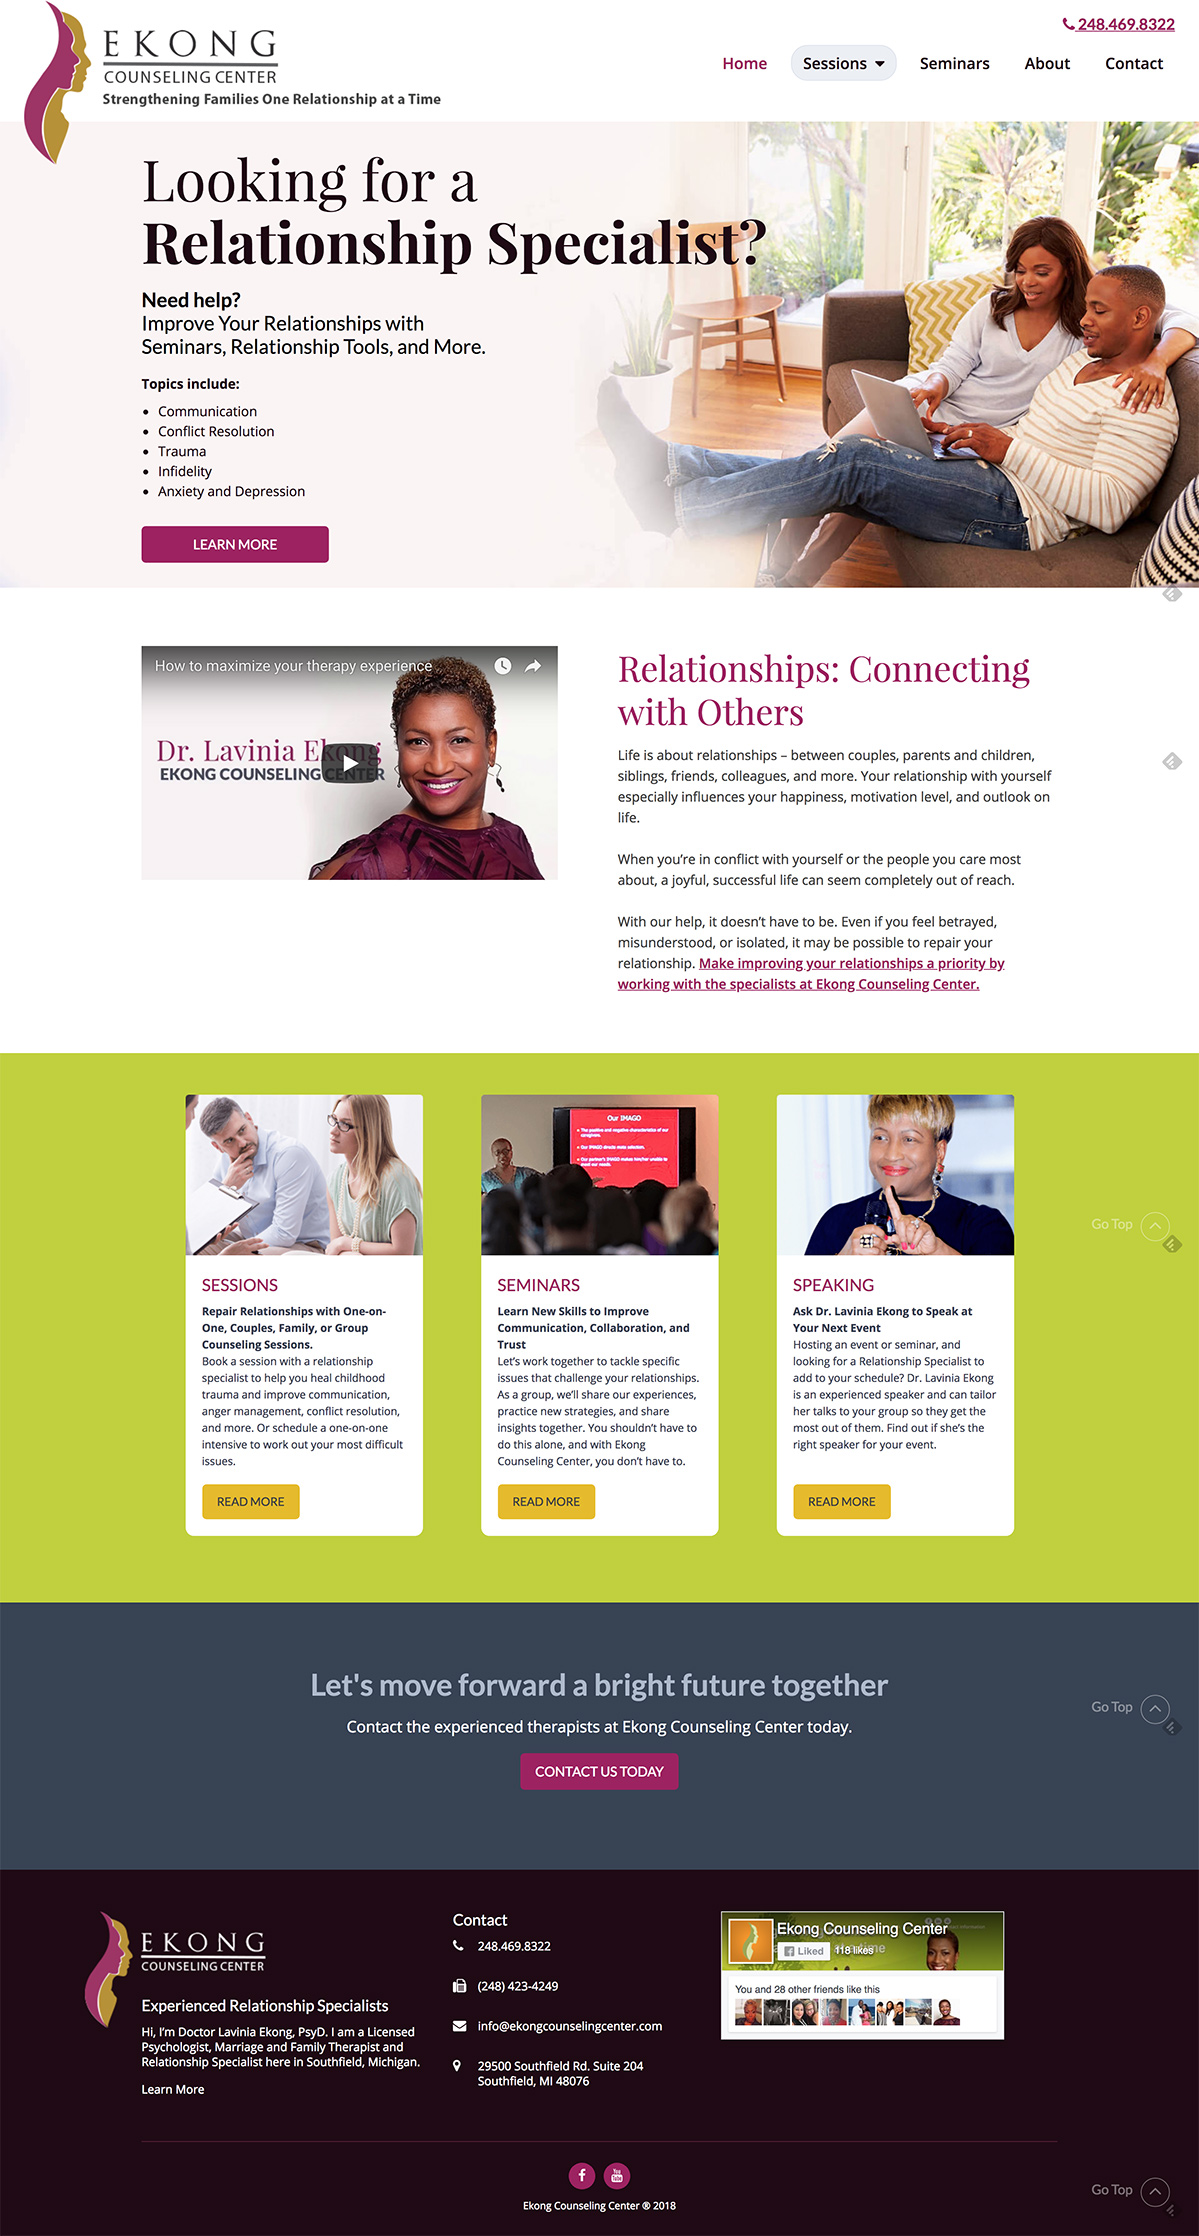 Ekong Counseling Center website Design-Home page